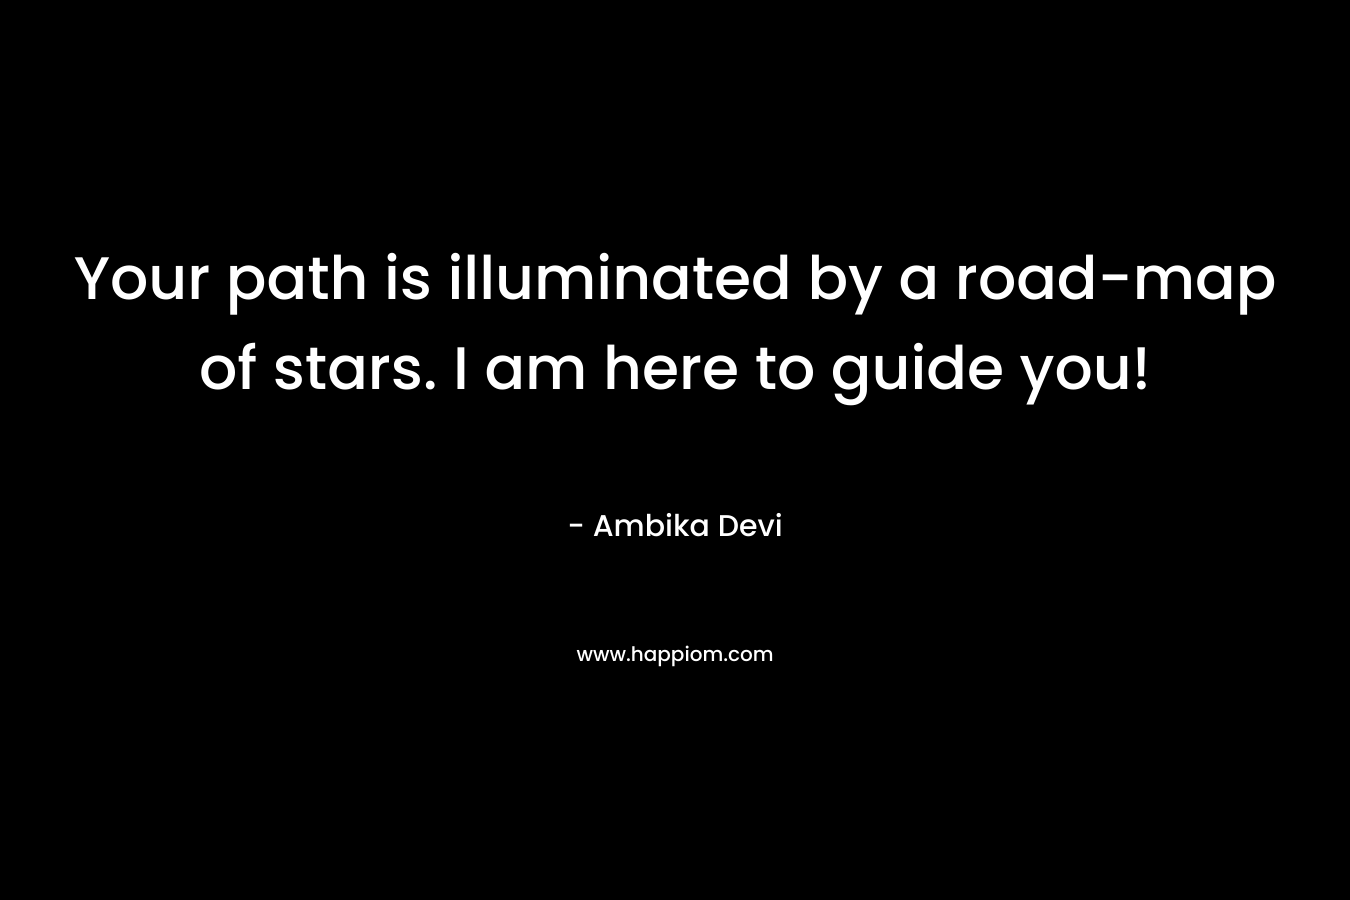 Your path is illuminated by a road-map of stars. I am here to guide you! – Ambika Devi